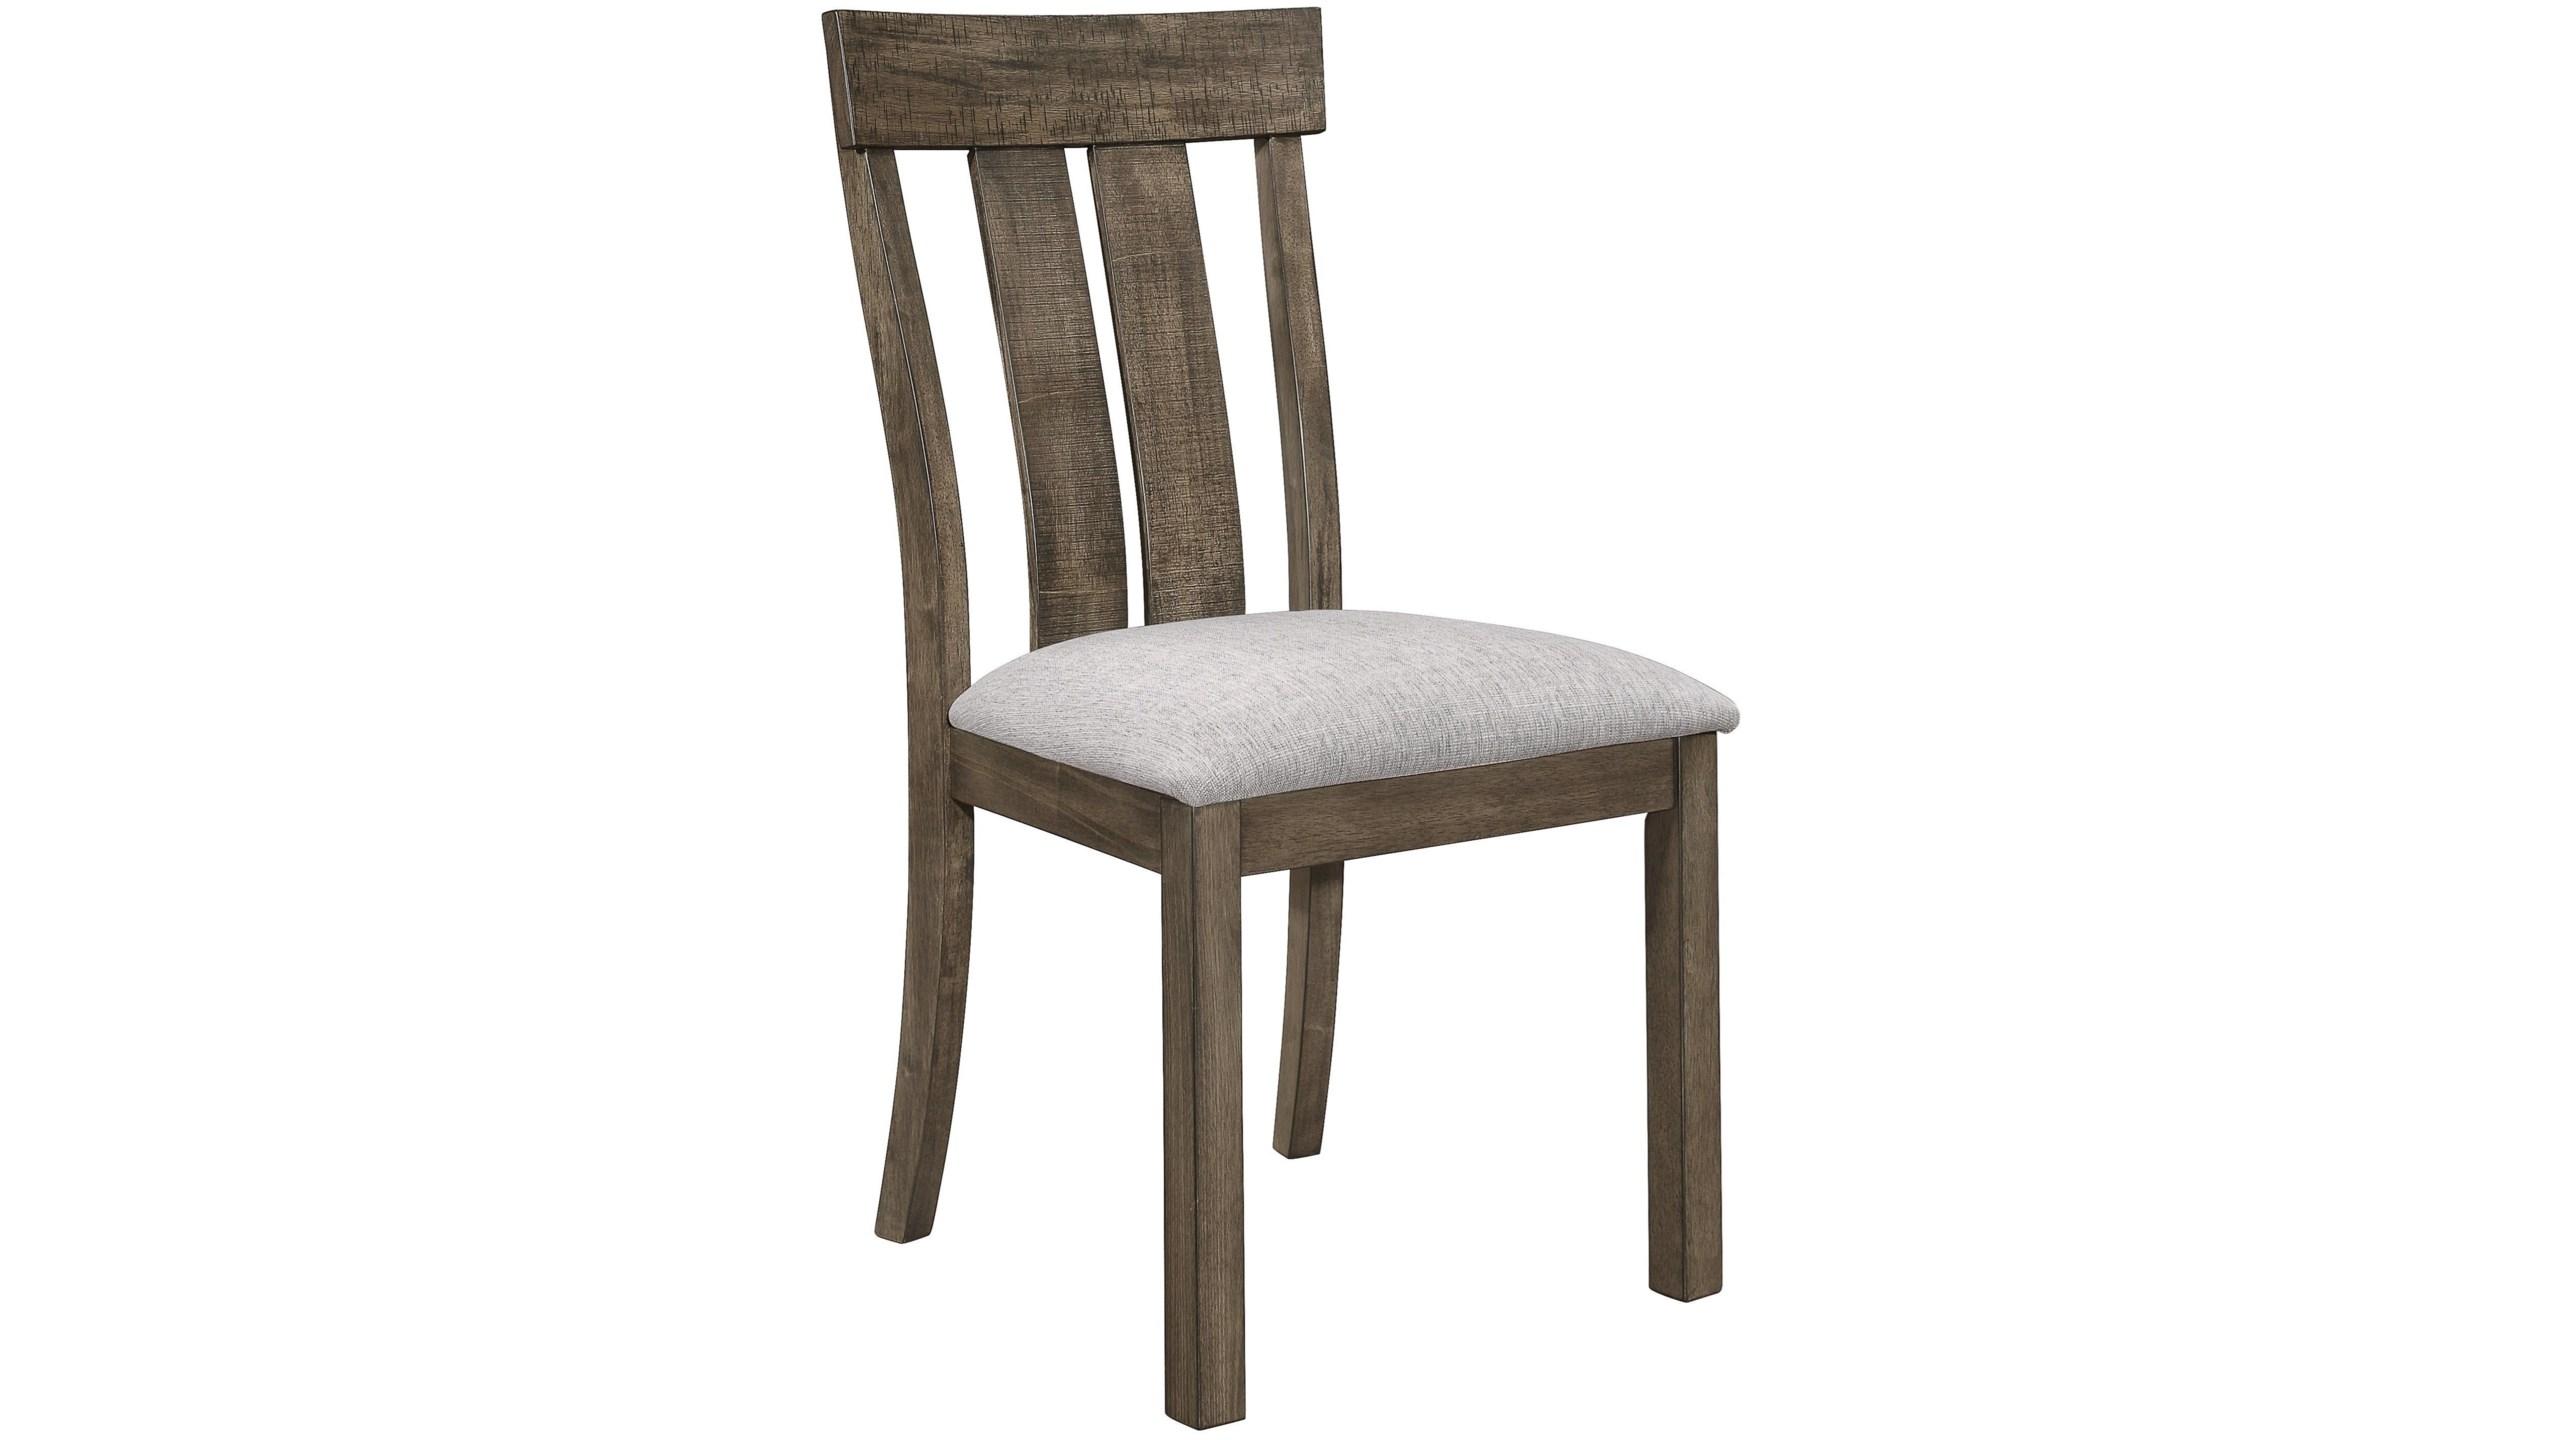 Modern, Farmhouse Dining Chair Set Quincy 2131S-2pcs in Brown Oak Fabric